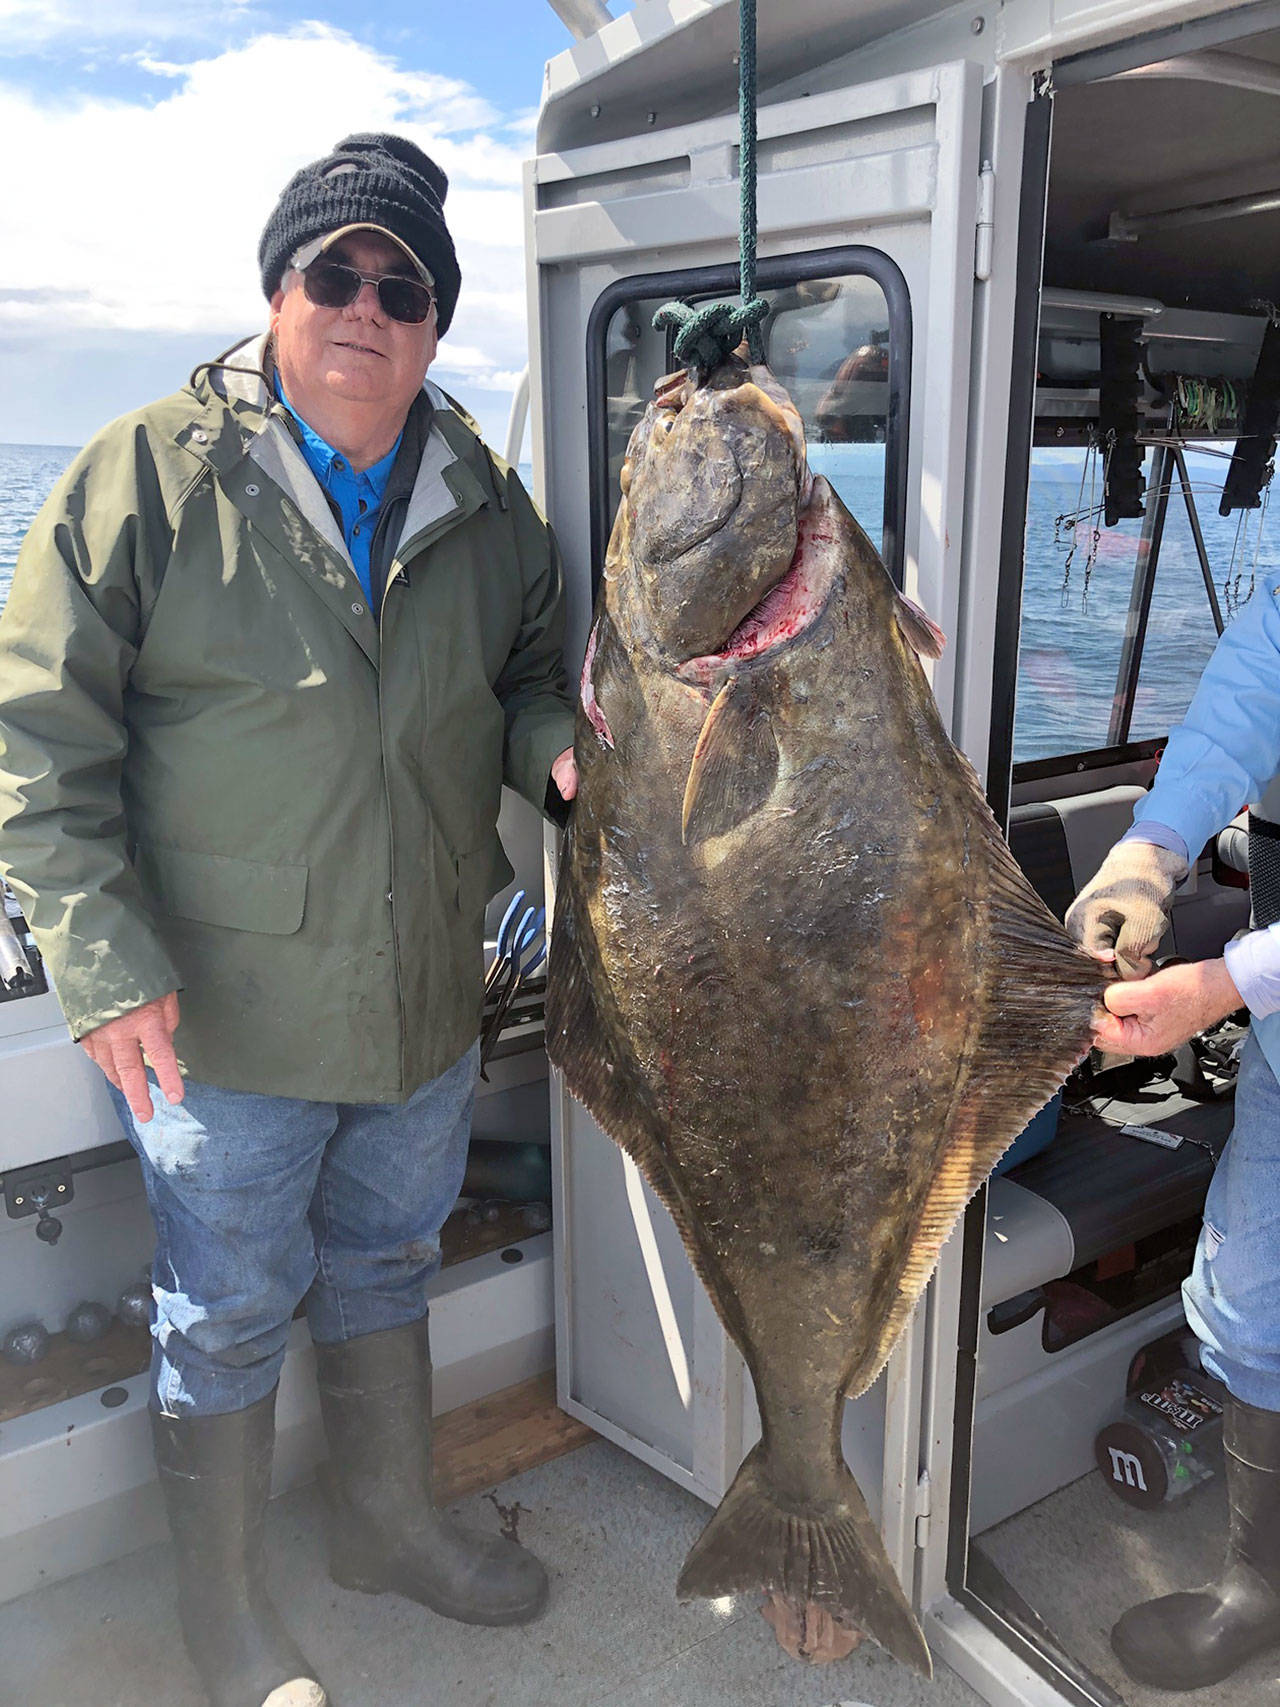 Sequim angler Bob Cooper, with the aid of fishing partners David Johnson and Wally Jenkins, hauled in a 95-pound halibut recently while fishing with herring bait off the Rock Pile near Port Angeles.